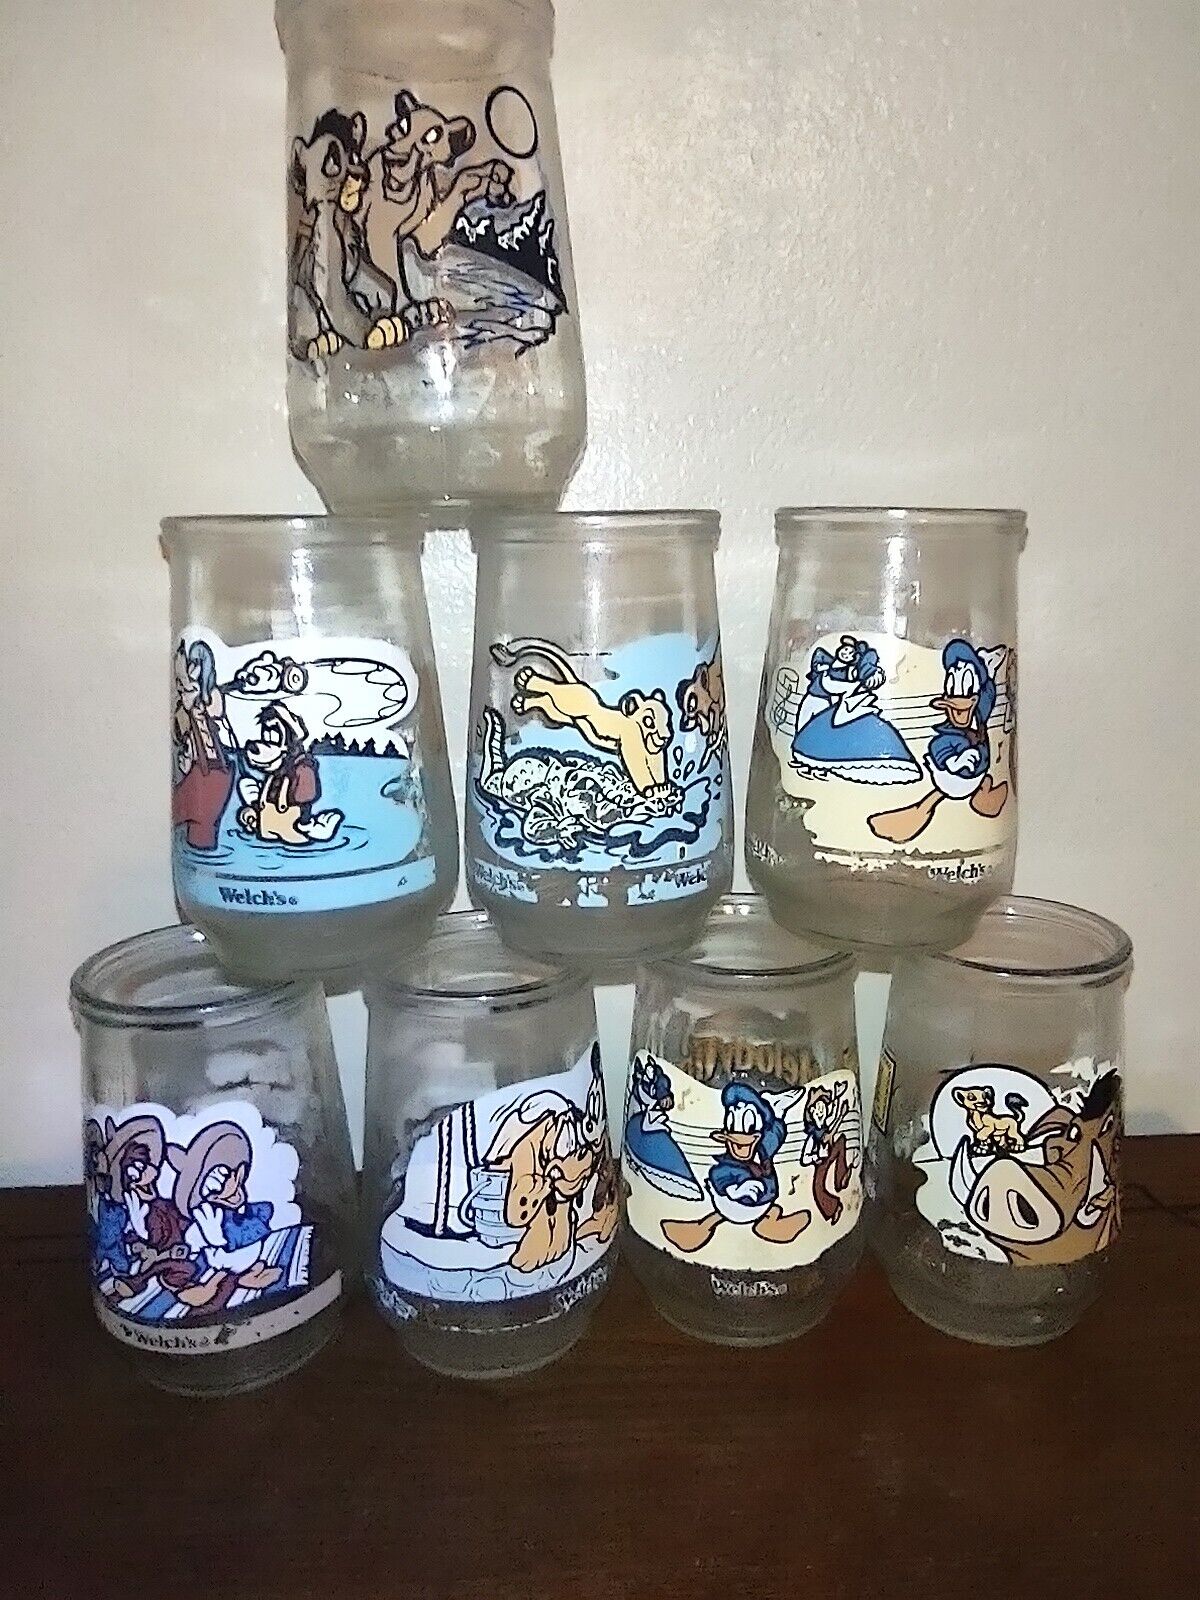 Lot Of 8 Vintage Welch’s Jelly Glass Jars -  8 Disney Glasses 